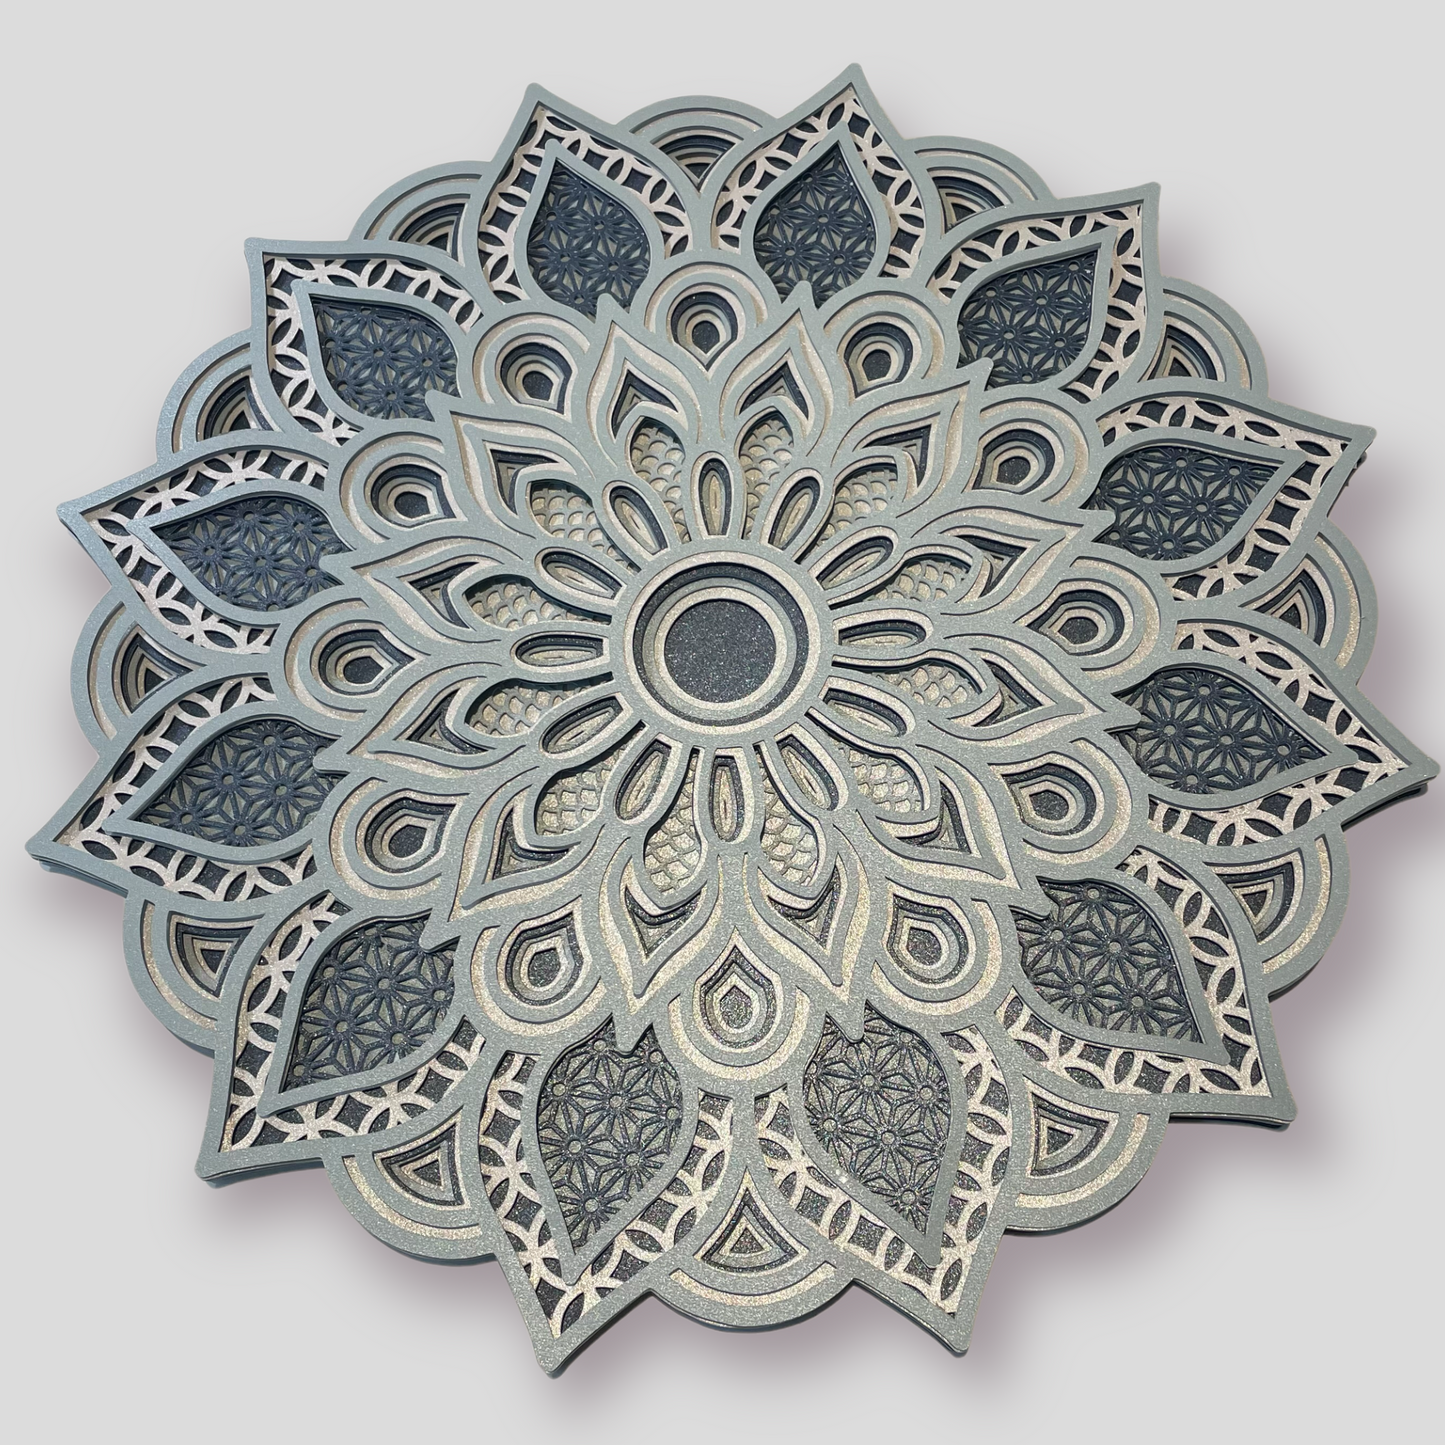 3D Layered Mandala design.  This is an instant download file SVG AI JPEG DXF EPS PNG formats included for all your Cricut Crafting Needs.  Layers of this 3d Mandala can be used separately and sized up for larger Laser cutters.  Check out all the 3d layered Mandala designs by Home Stitchery Decor.